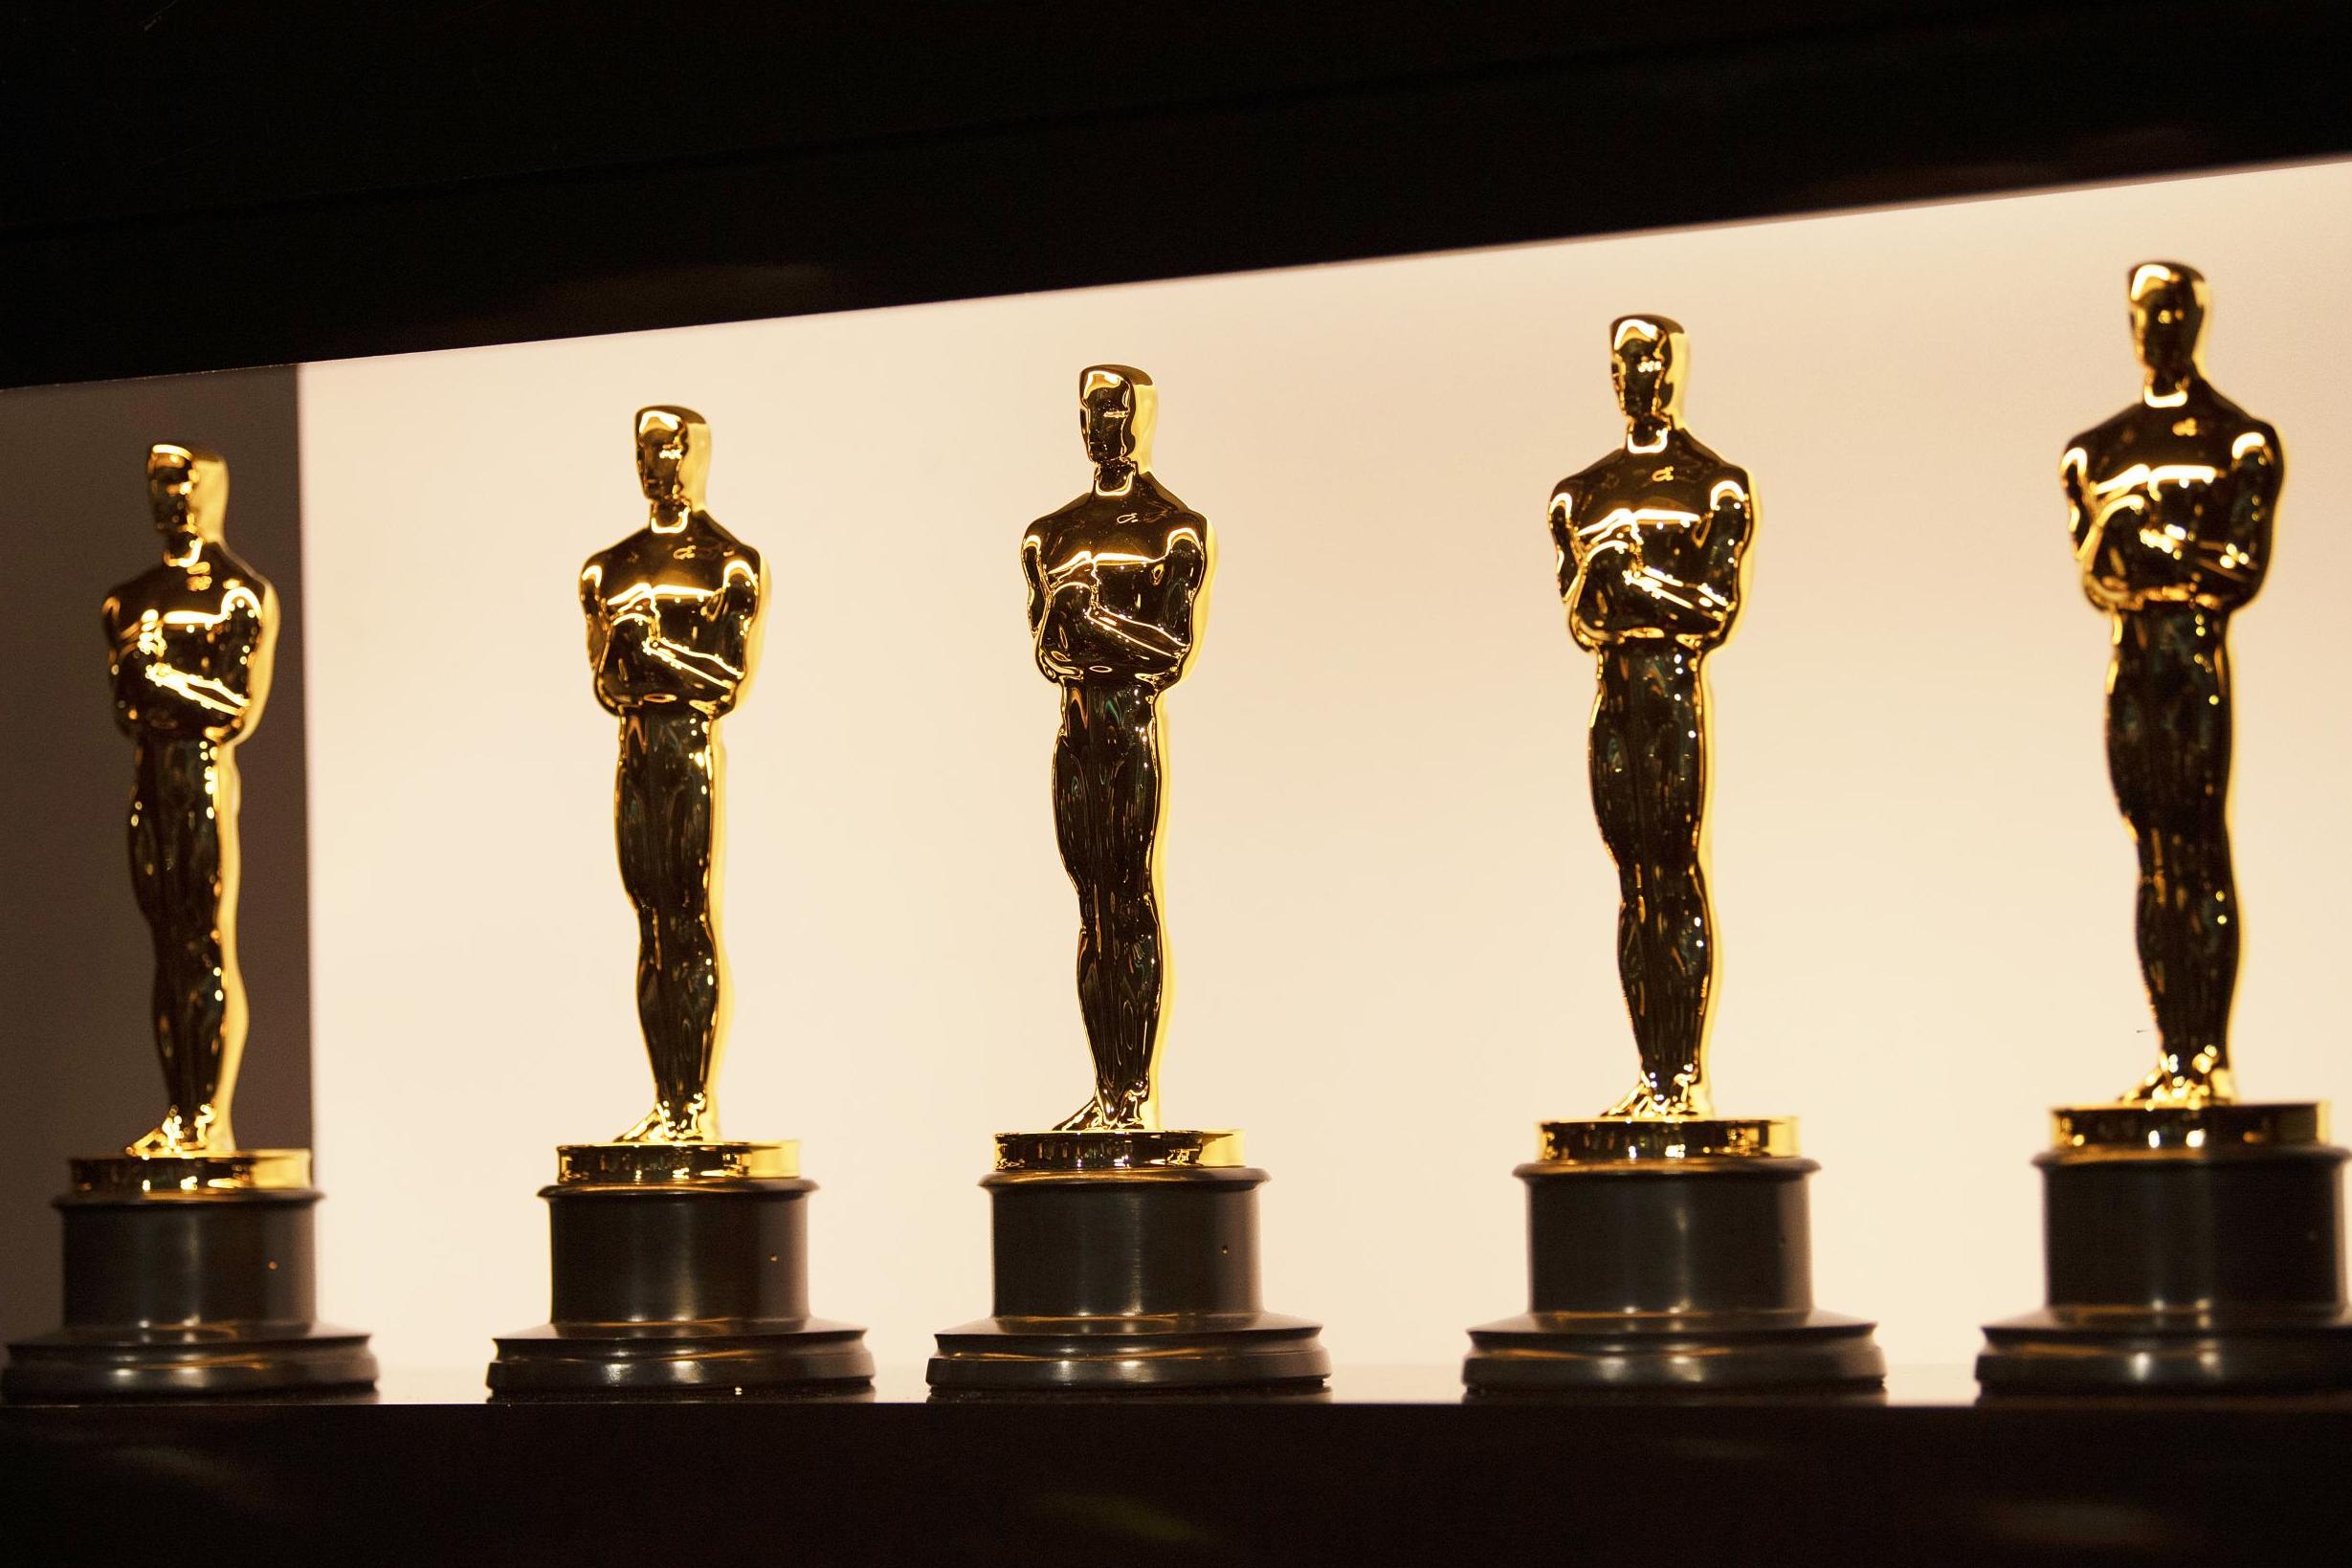 Oscars statuettes at the 92nd Academy Awards on 9 February 2020 in Hollywood, California.